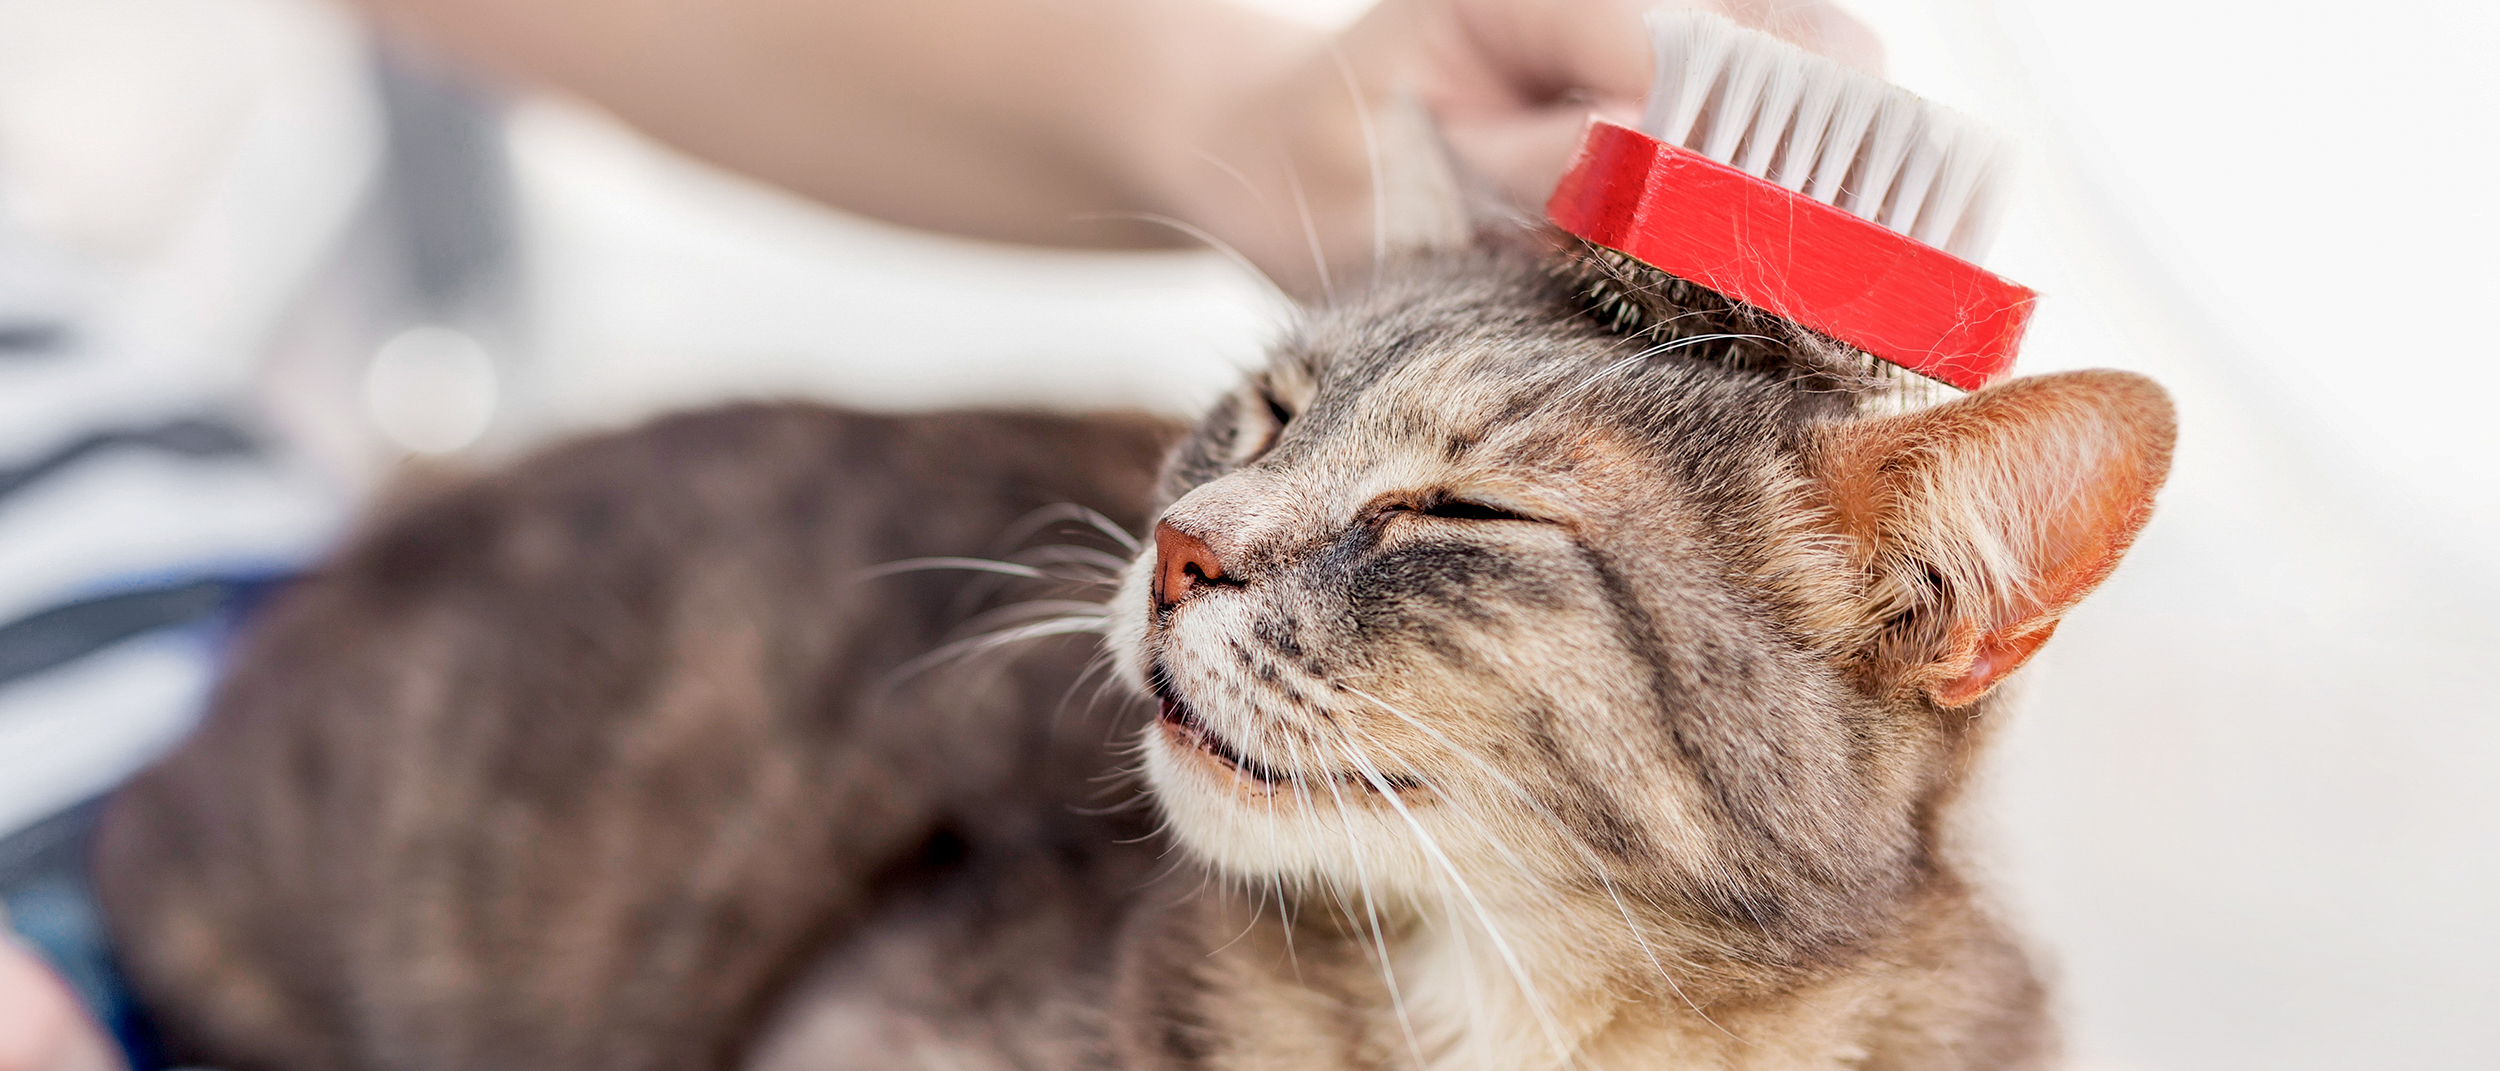 Adult cat lying down on owners knee while being groomed with a red brush.